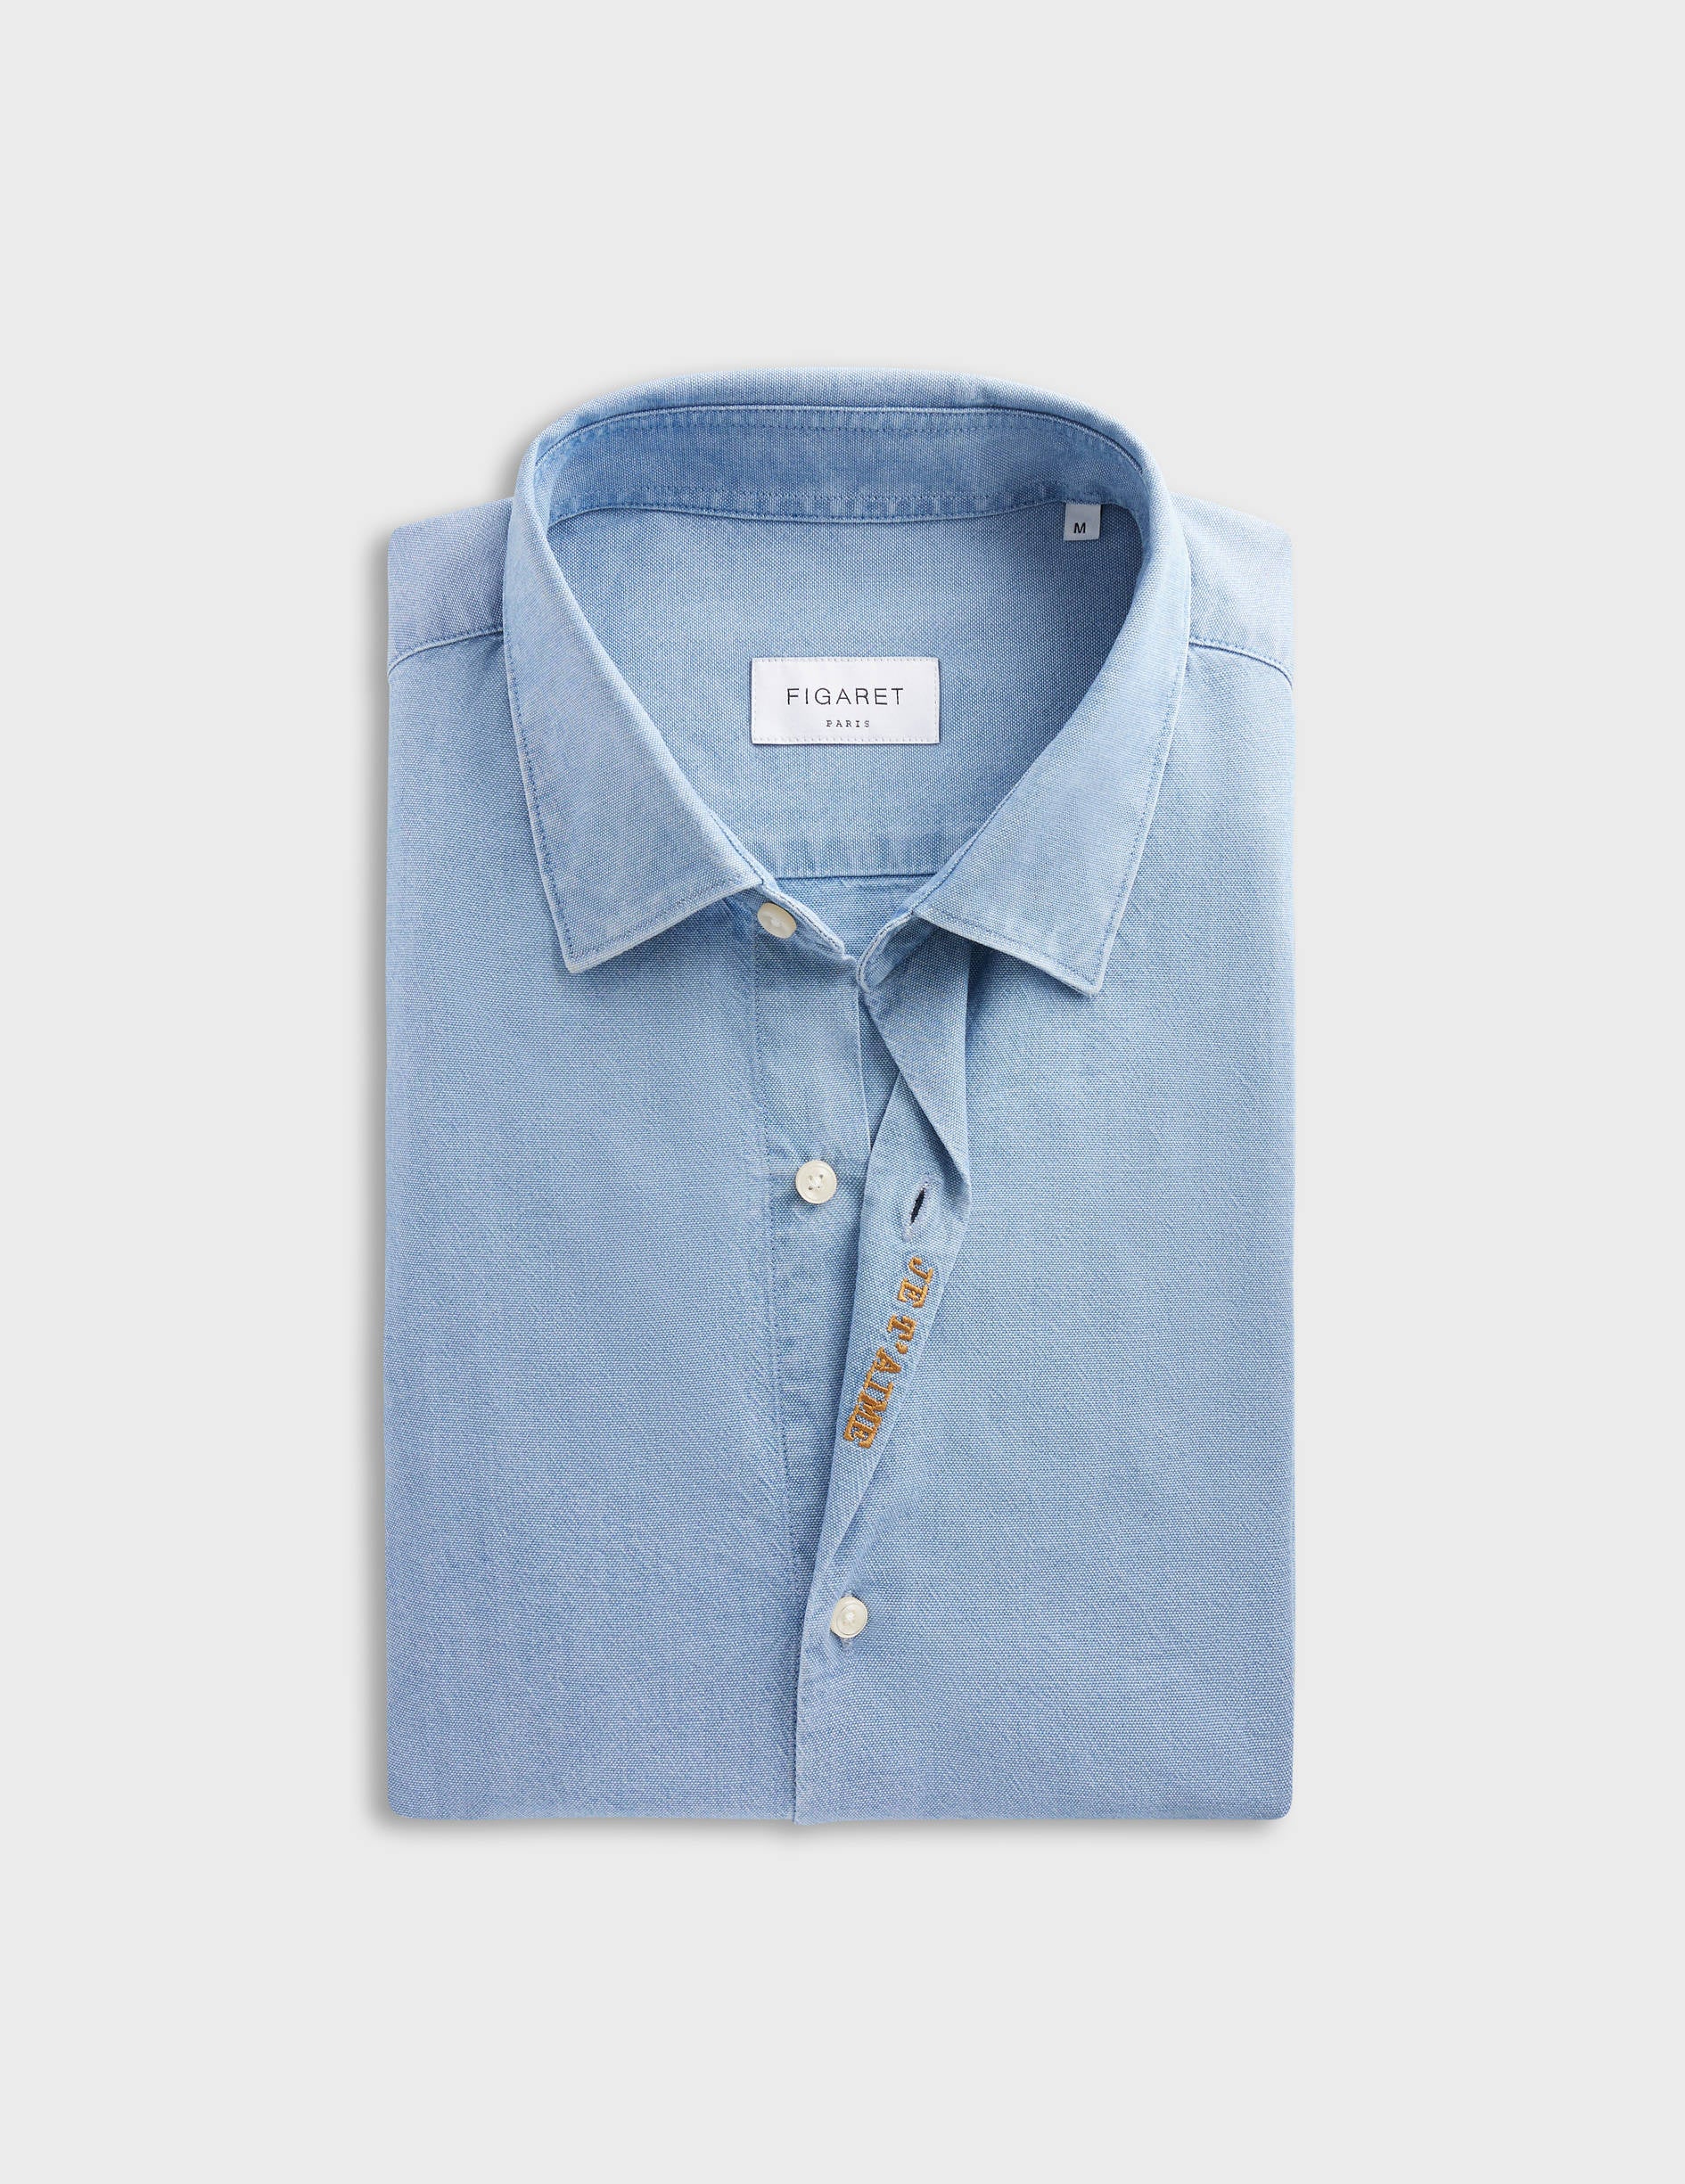 Chemise mixte "Je t'aime" bleu clair - Chambray - Col Figaret